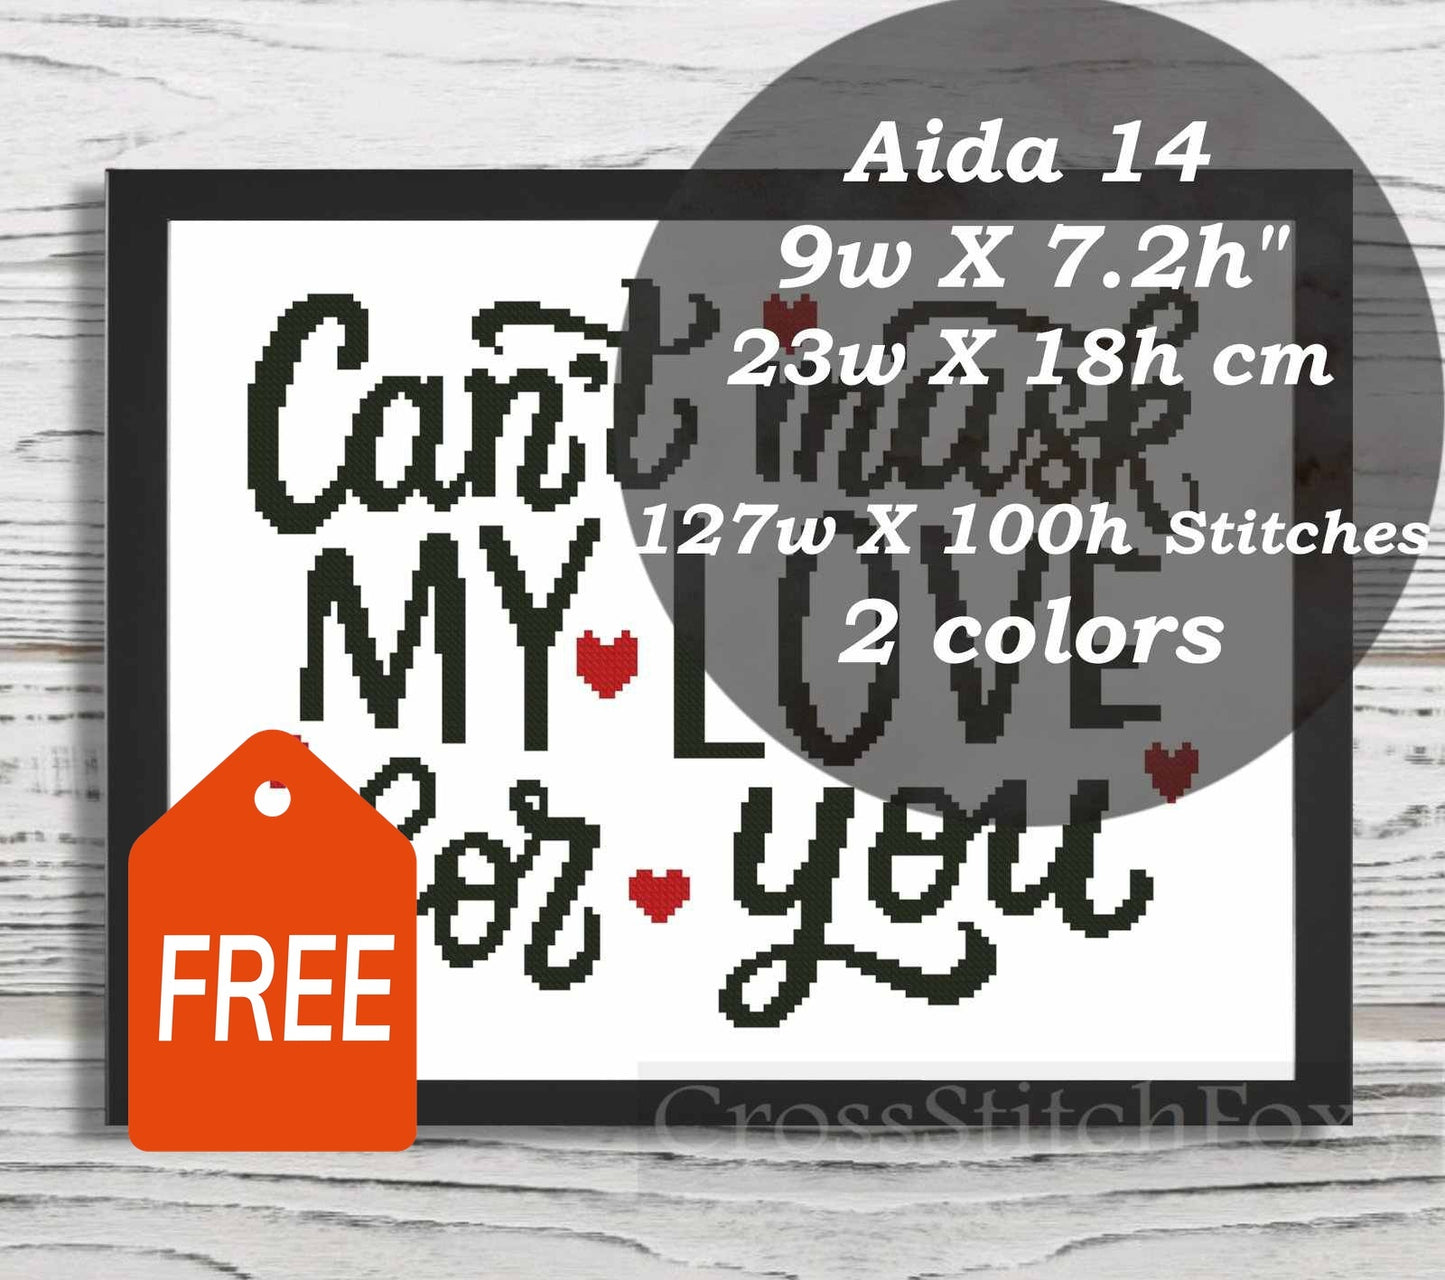 Can't Mask My Love For You cross stitch pattern FREE